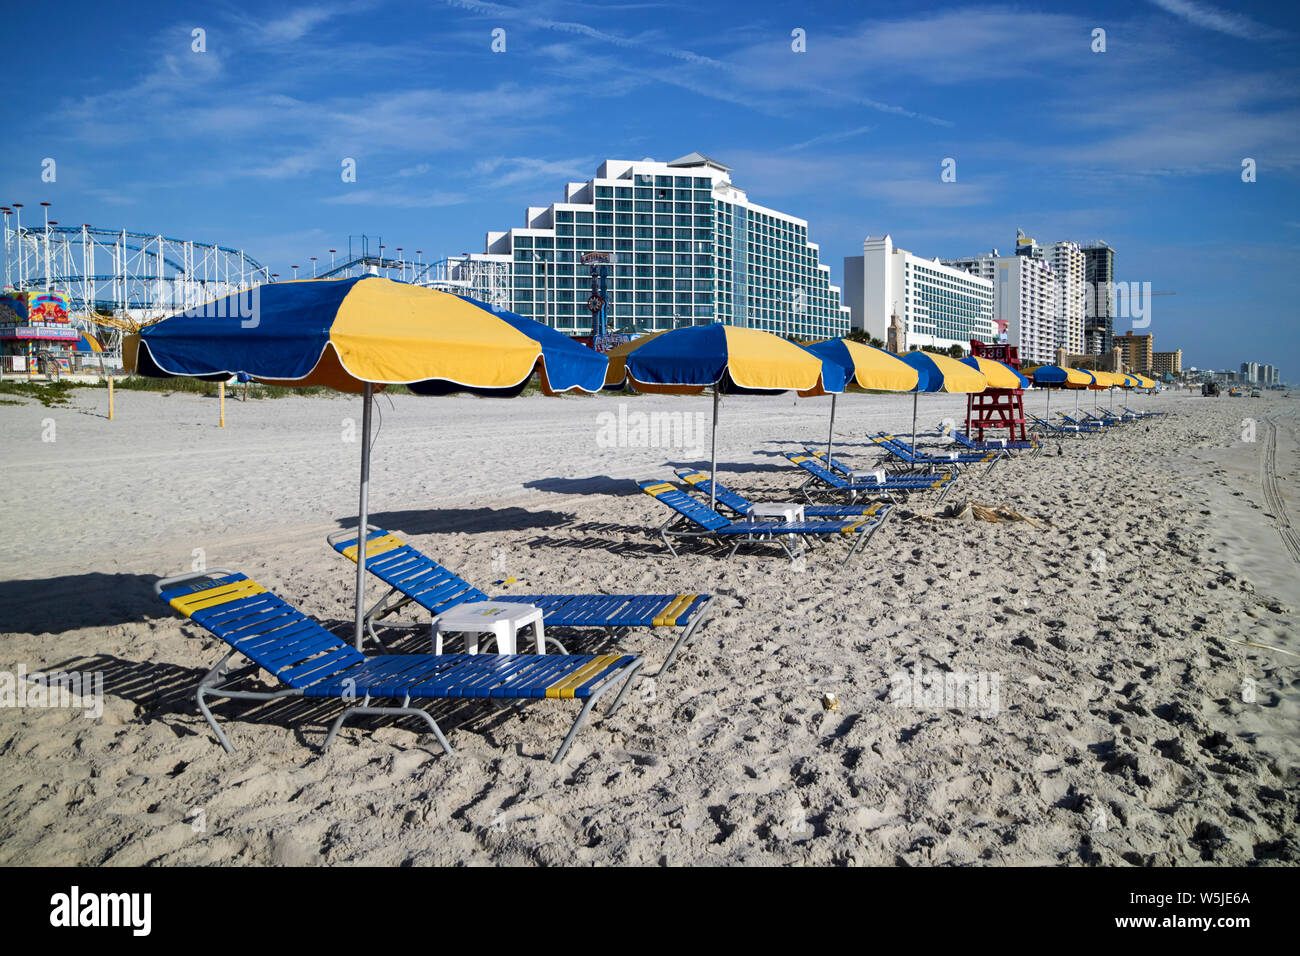 empty sun loungers and umbrellas for hire early morning daytona beach florida usa united states of america Stock Photo